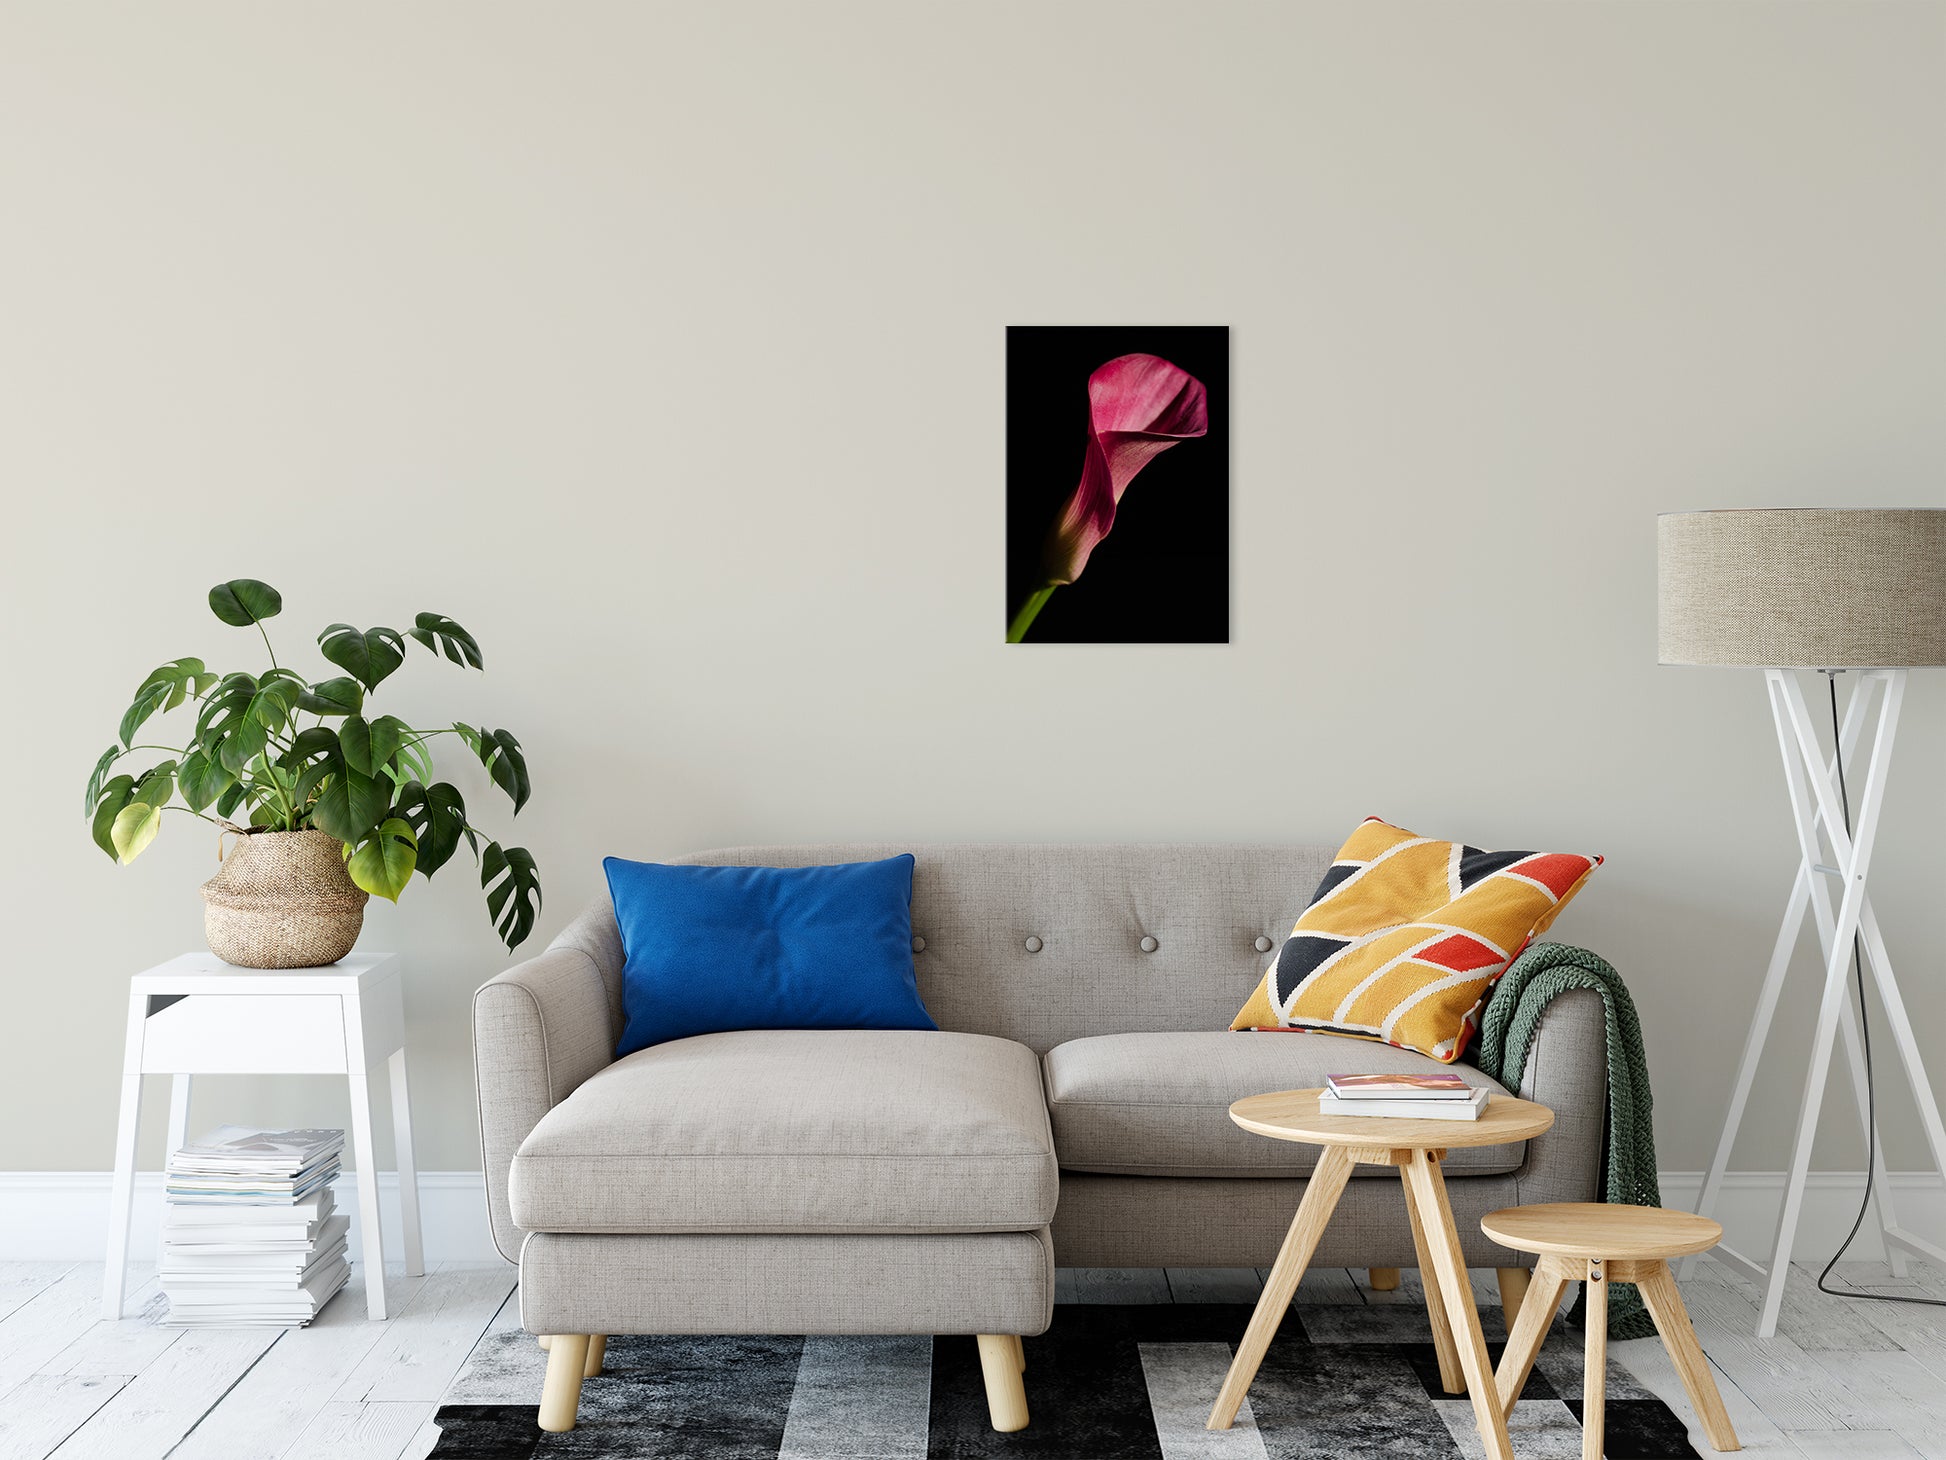 Pink Calla Lily Flower on Black Nature / Floral Photo Fine Art Canvas Wall Art Prints 16" x 20" - PIPAFINEART